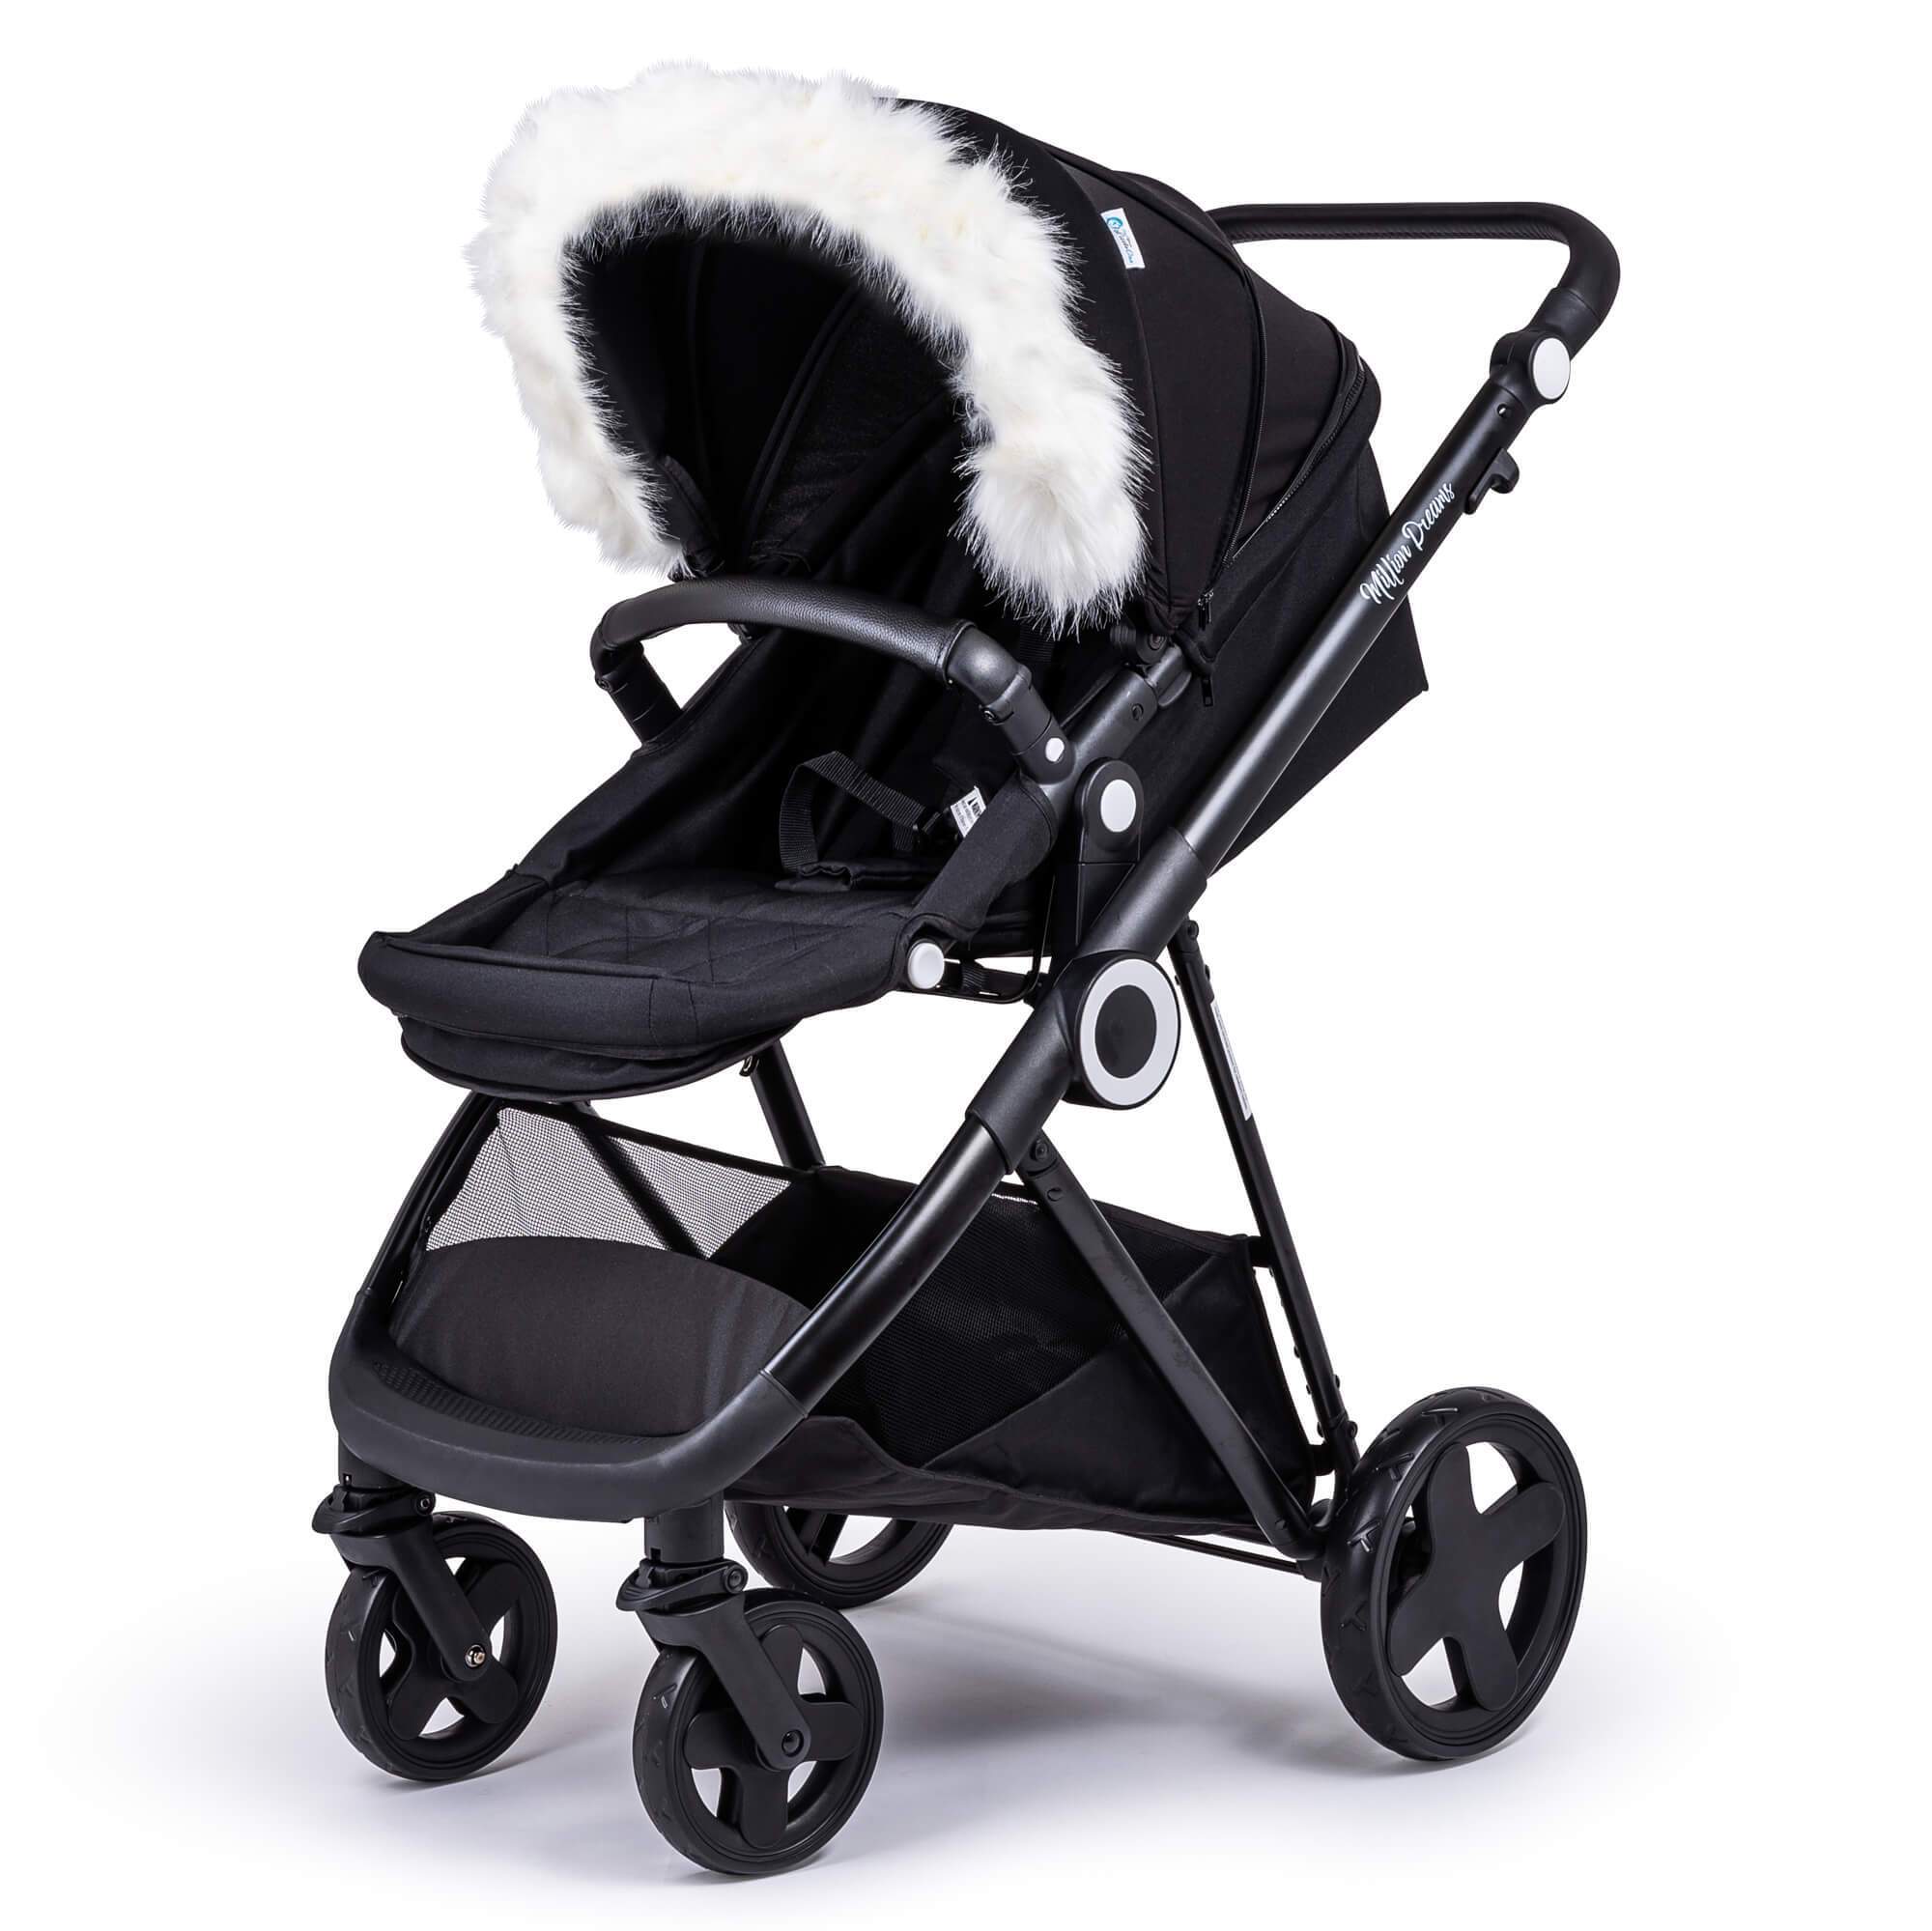 Pram Fur Hood Trim Attachment For Pushchair Compatible with My Child - White / Fits All Models | For Your Little One